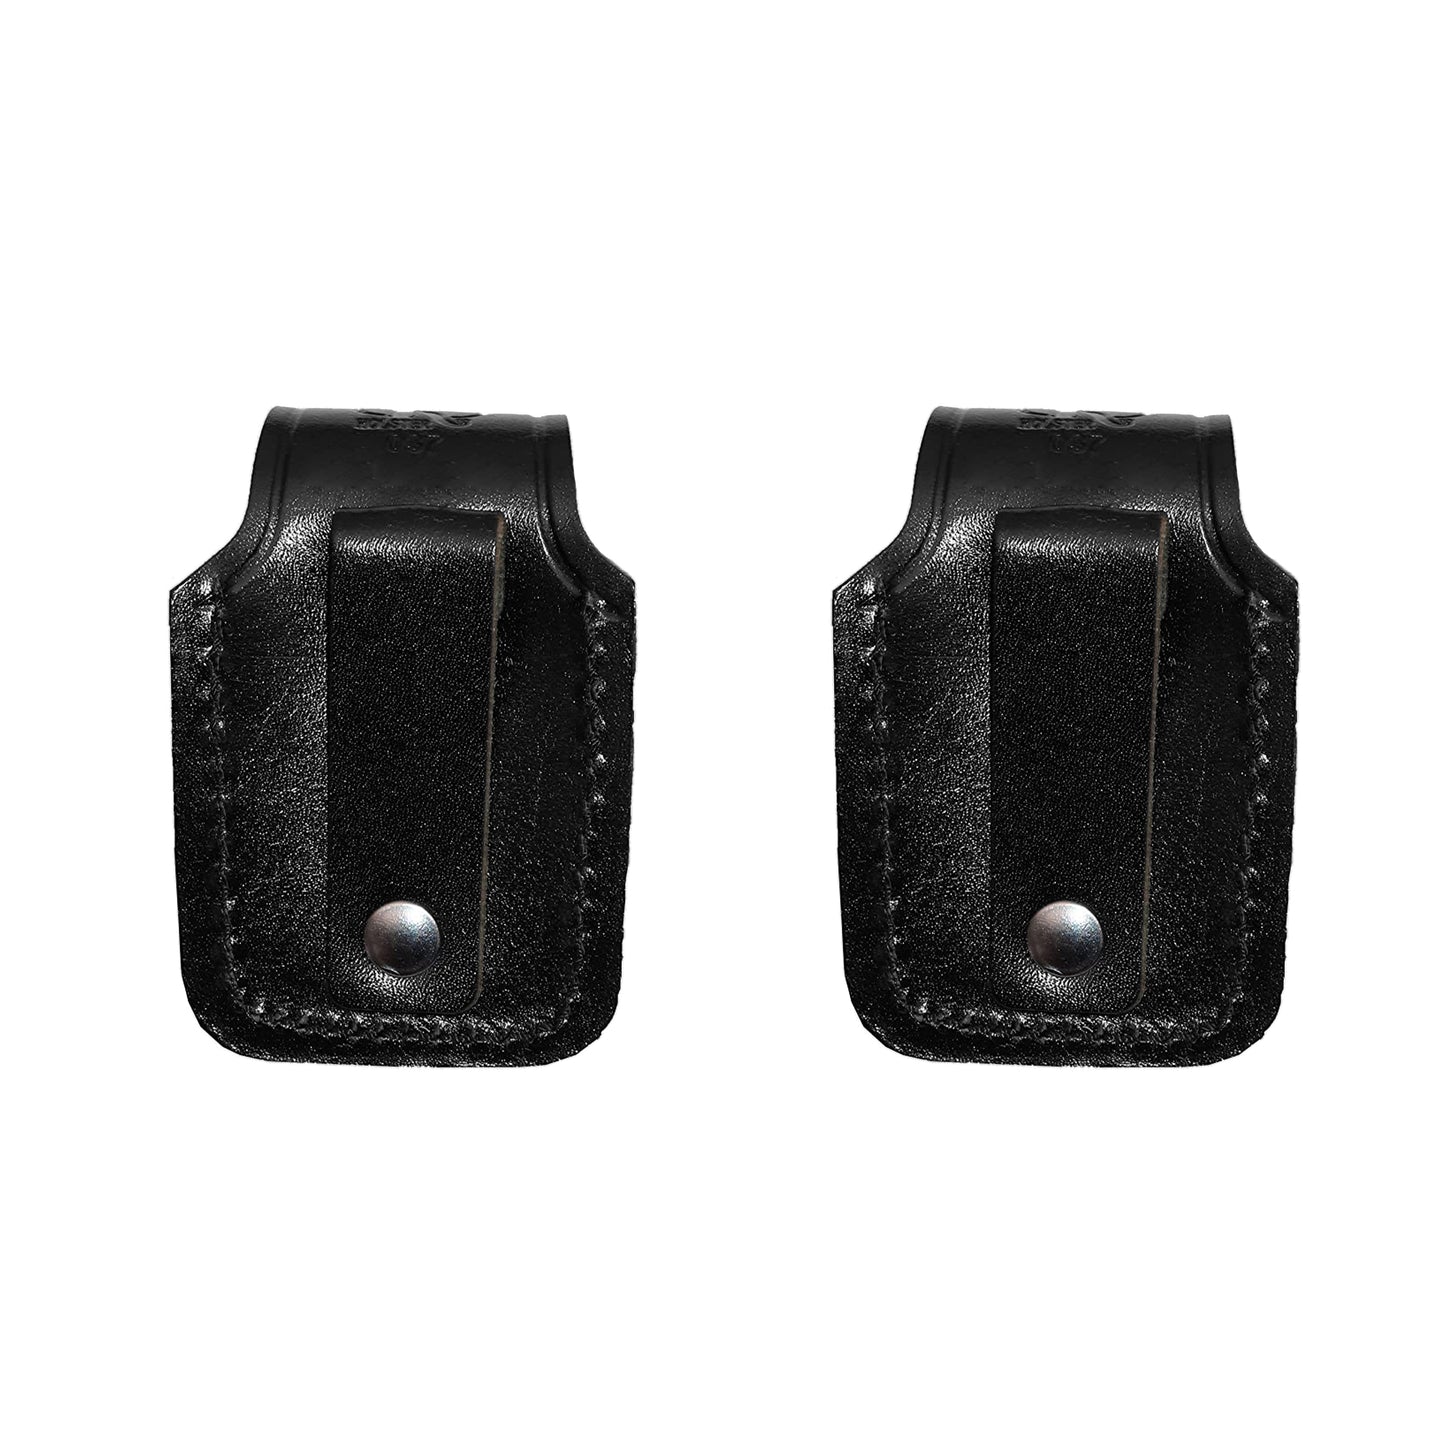 Two Single Leather Speedloader Pouch for 357 Magnum 6 & 7 Shots, 44 Magnum 5 Shot, S&W .38 Special 6 Shot Speedloaders Handmade! (ALS2037)